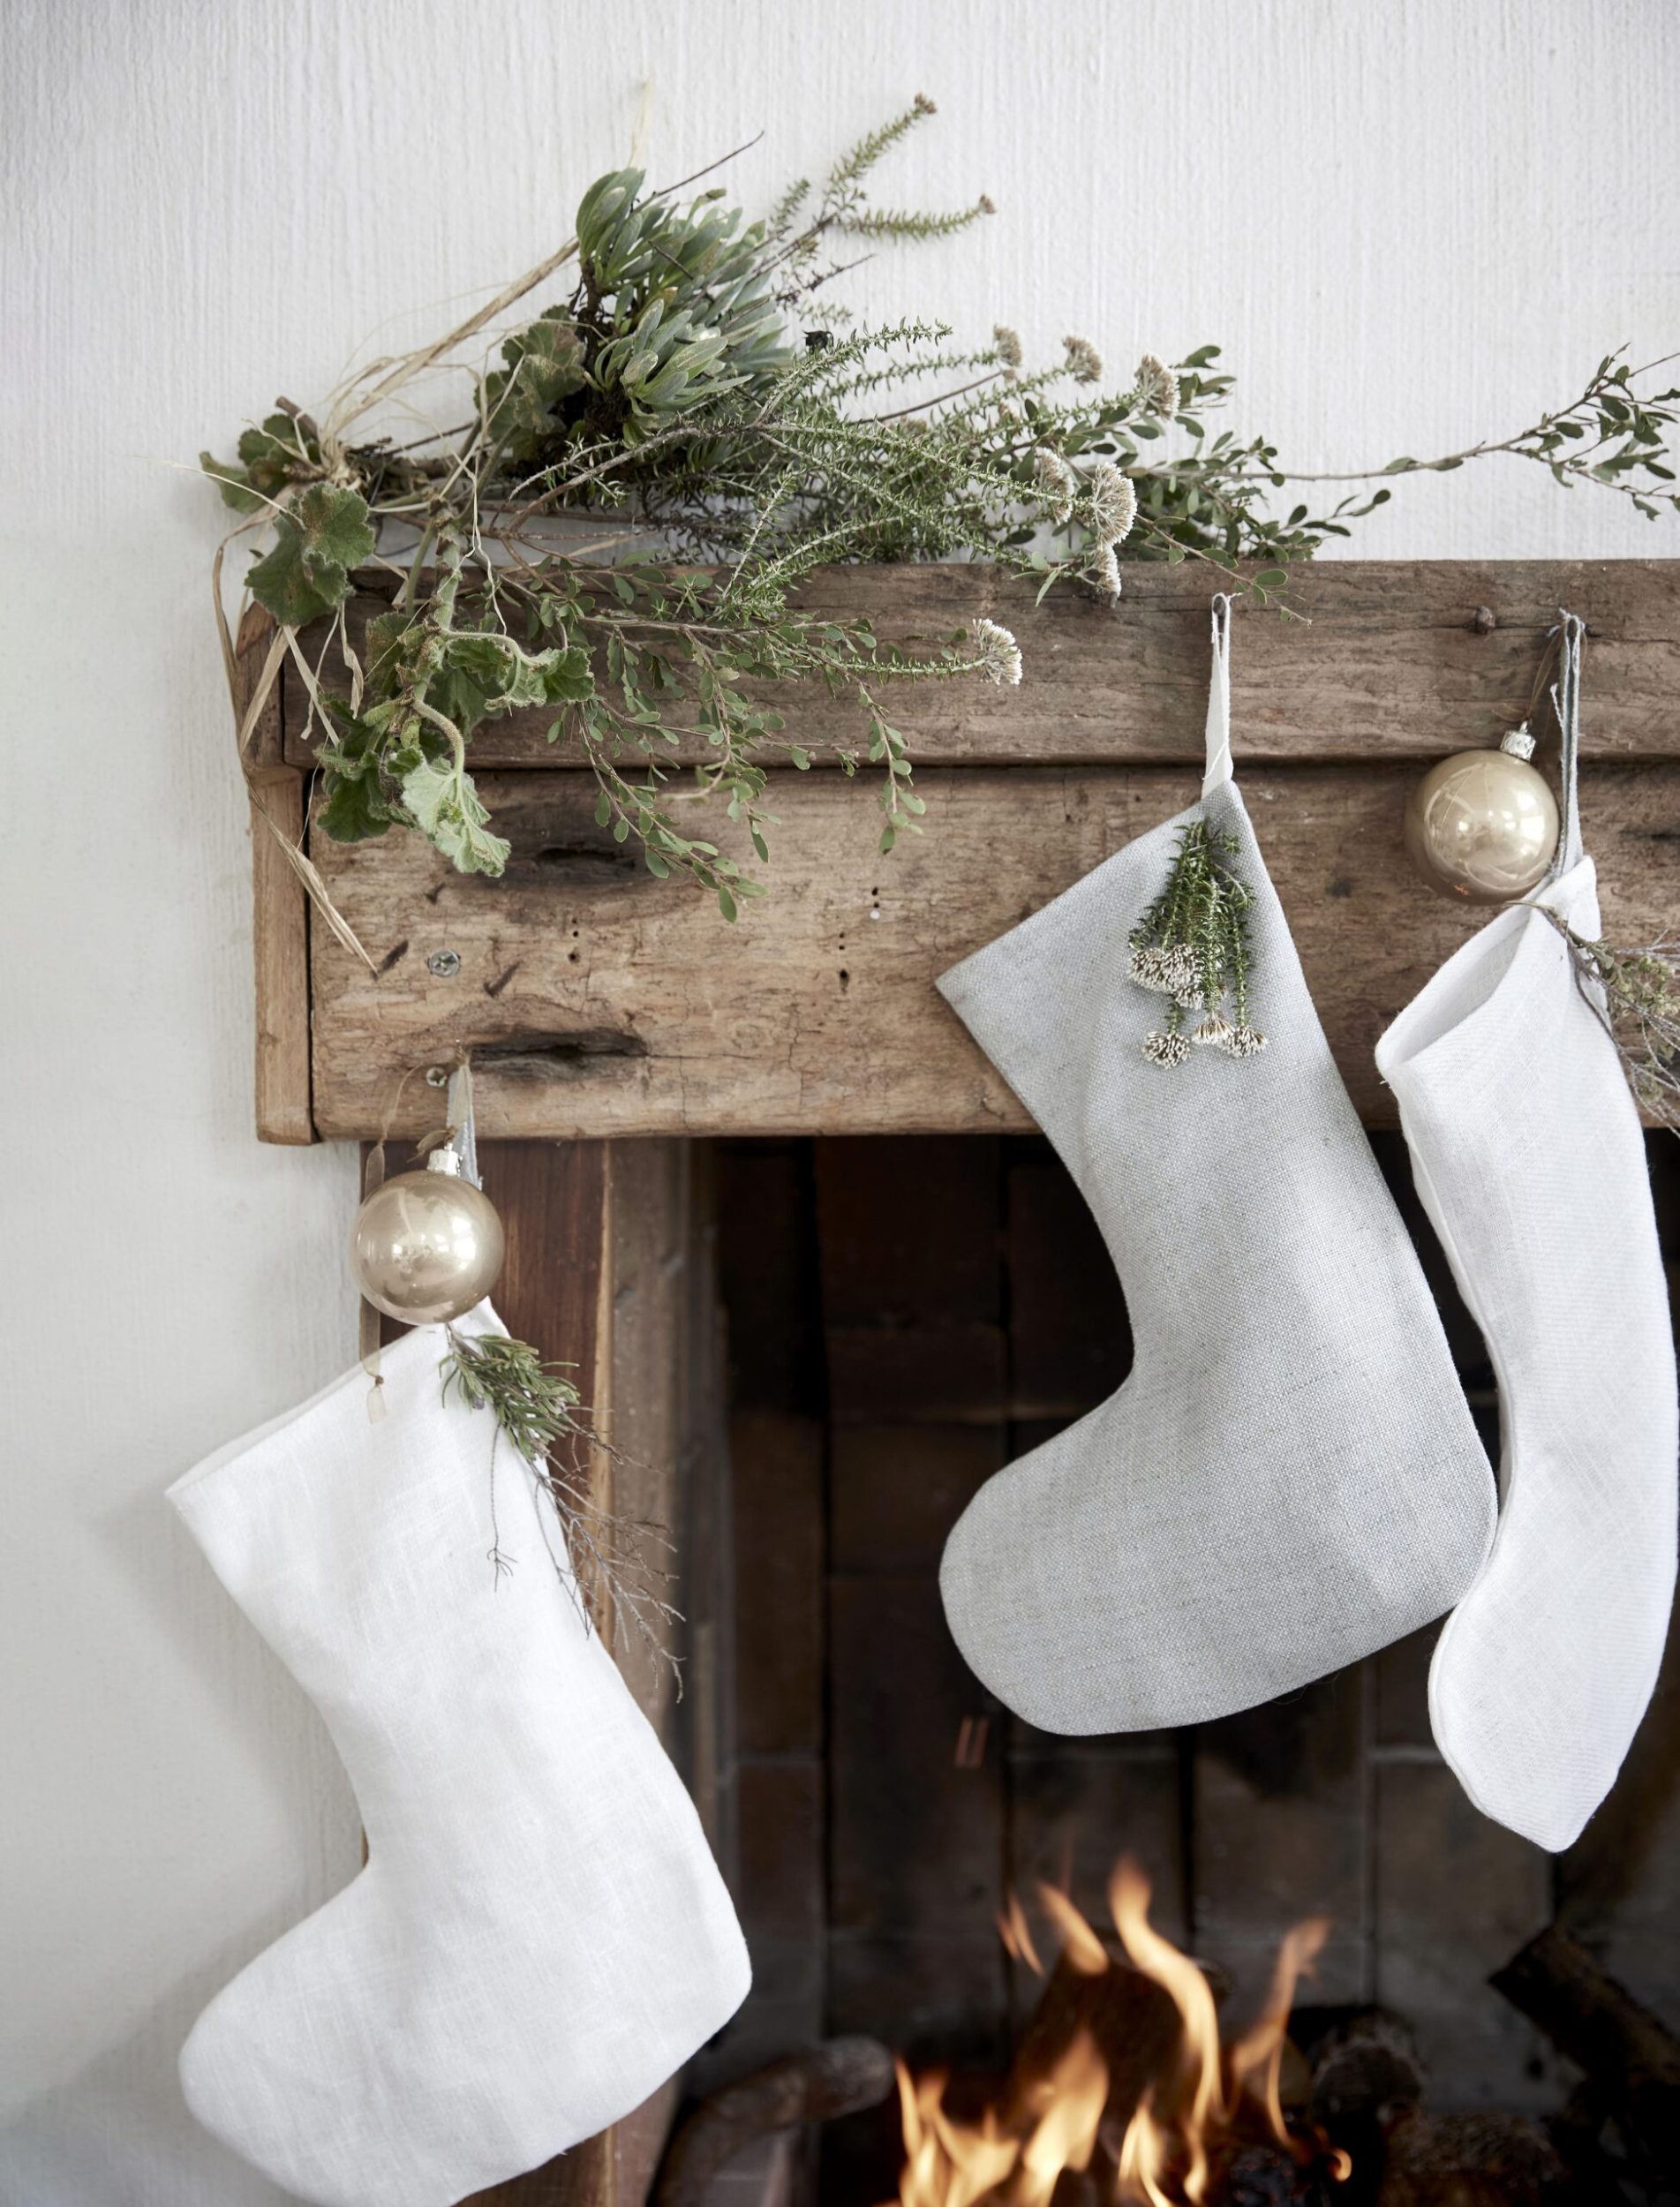 white stockings hanging from a rustic wooden mantle